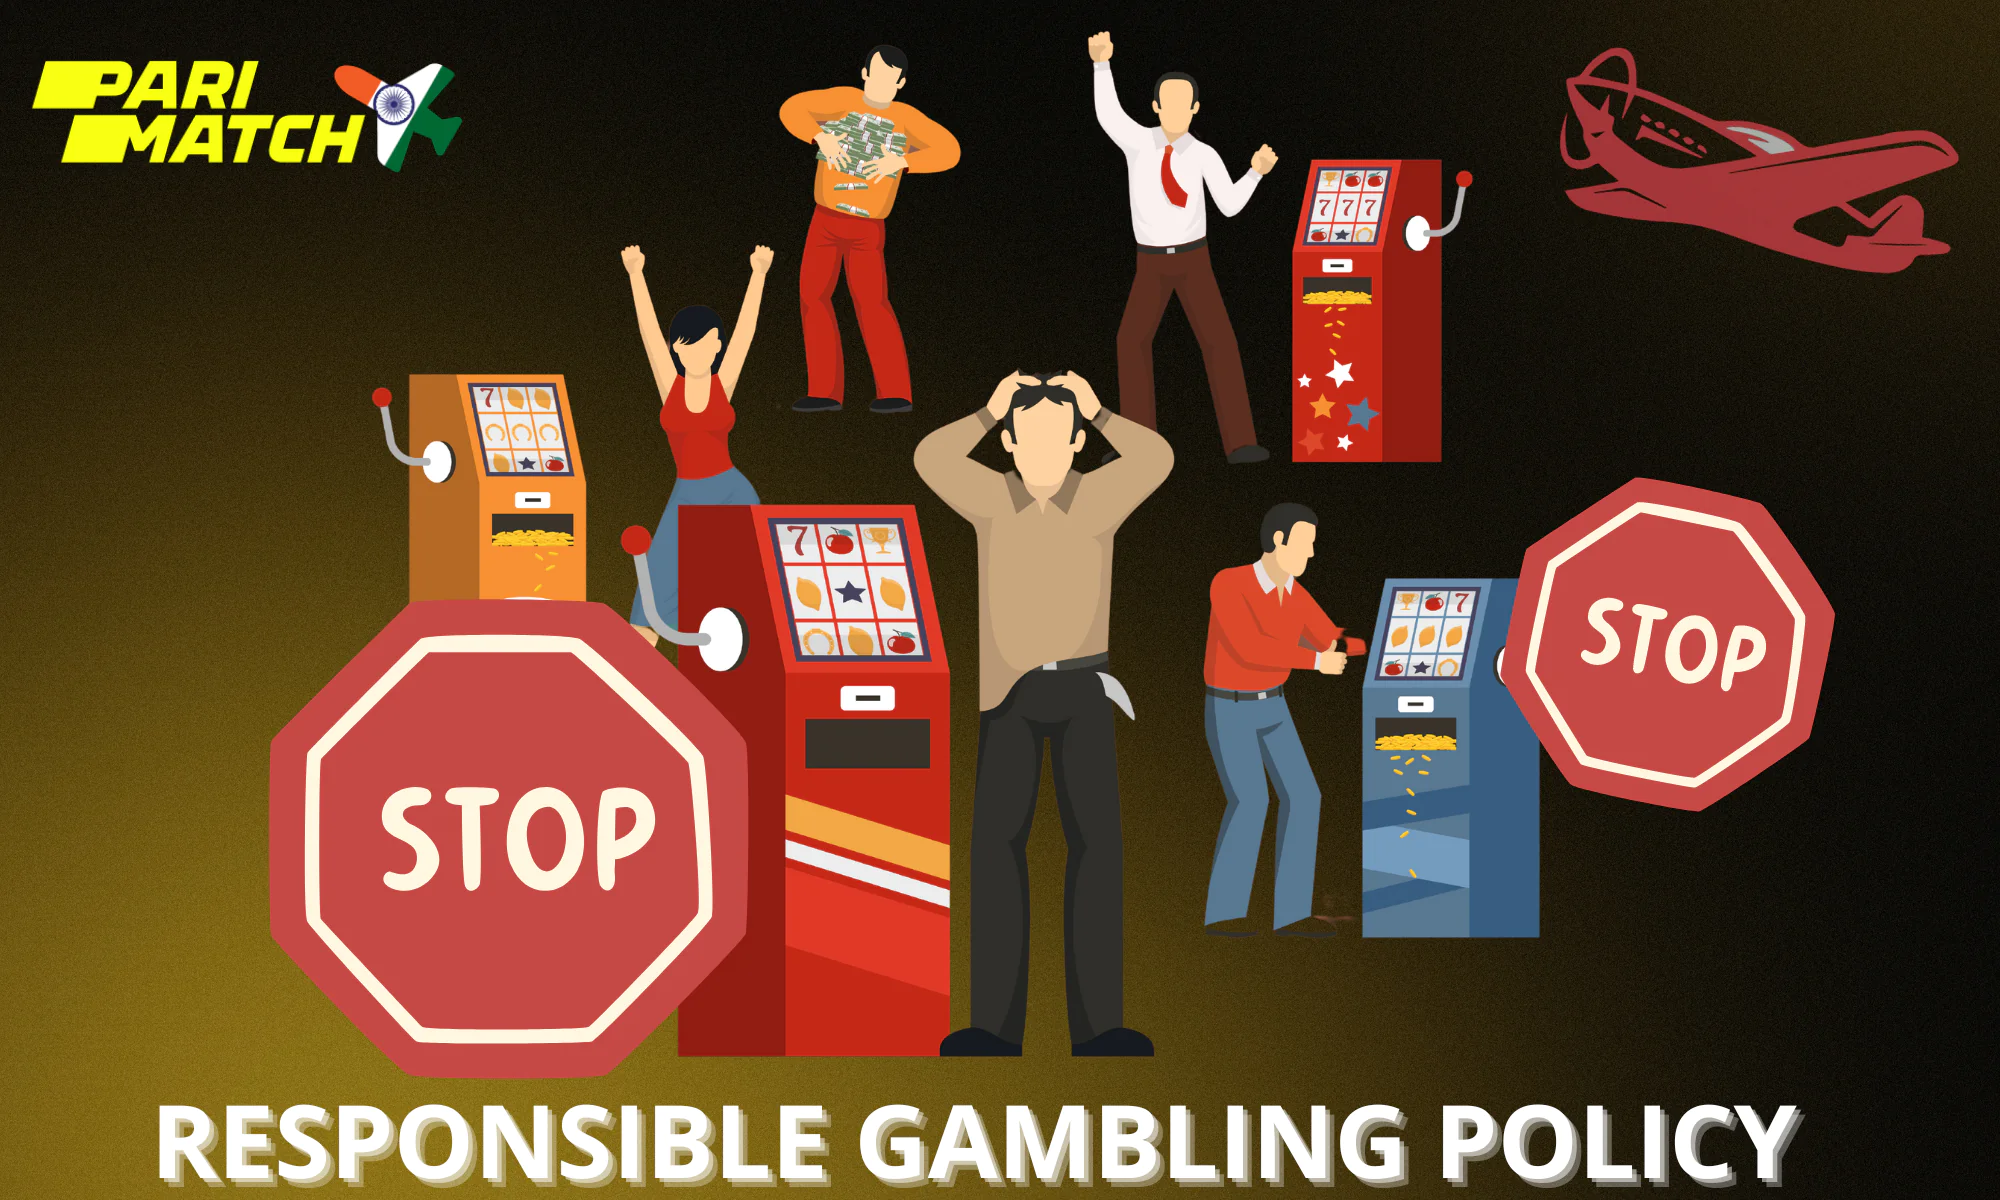 Parimatch adheres to the responsible gaming policy and helps its users